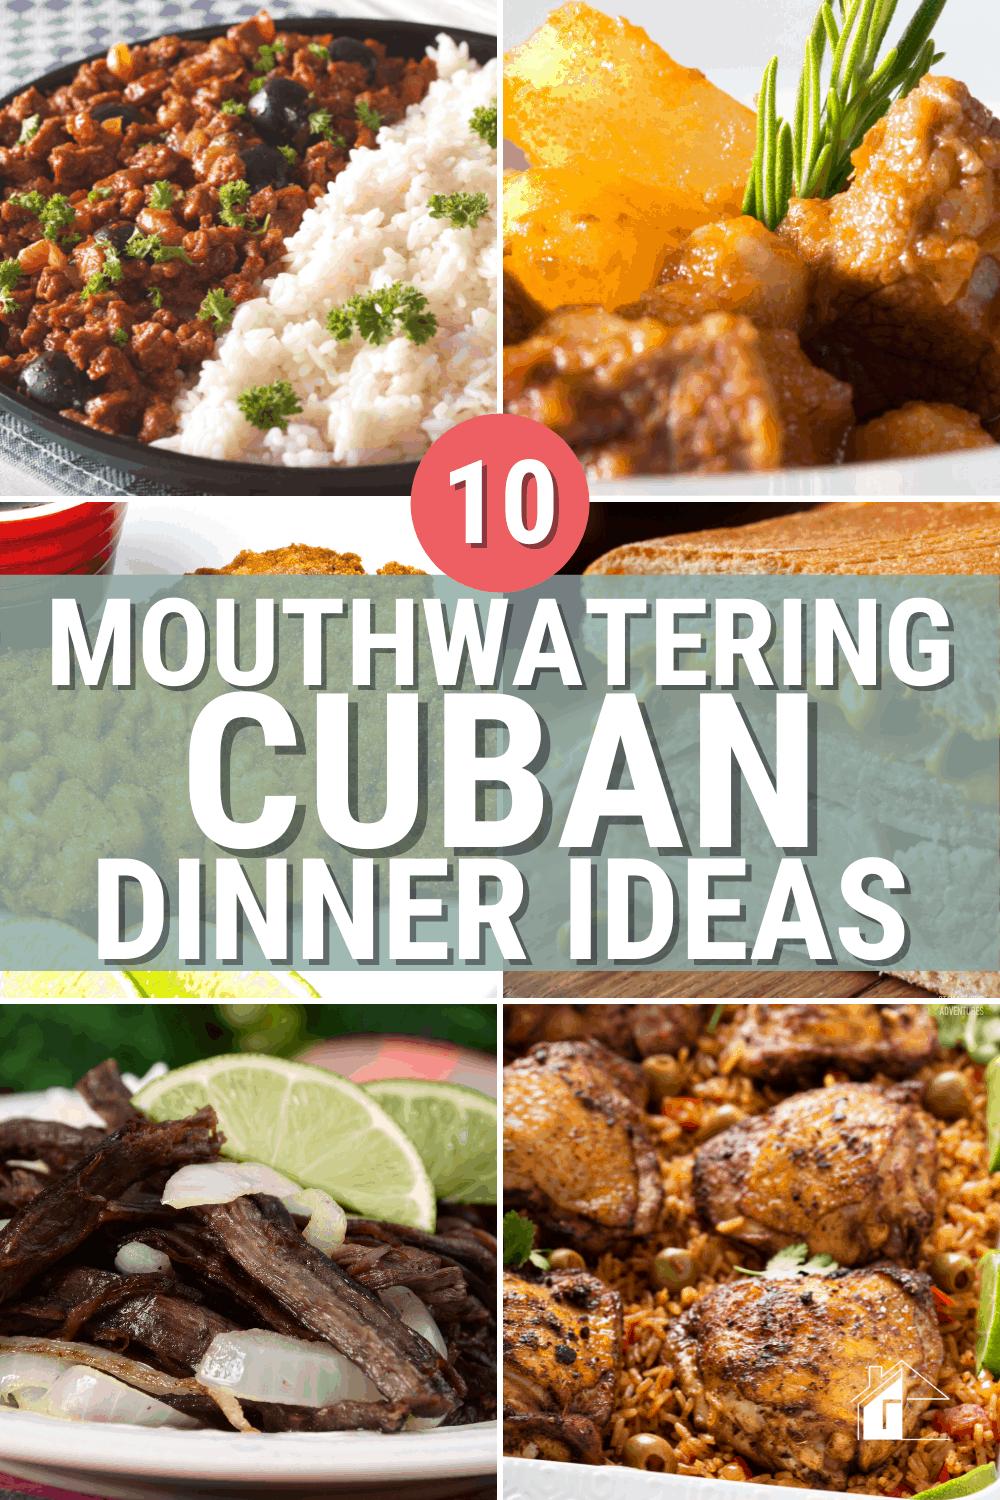 The best part of any culture is the food. So spice up your dinner with these ten unique and tasty Cuban dinner ideas! via @mystayathome